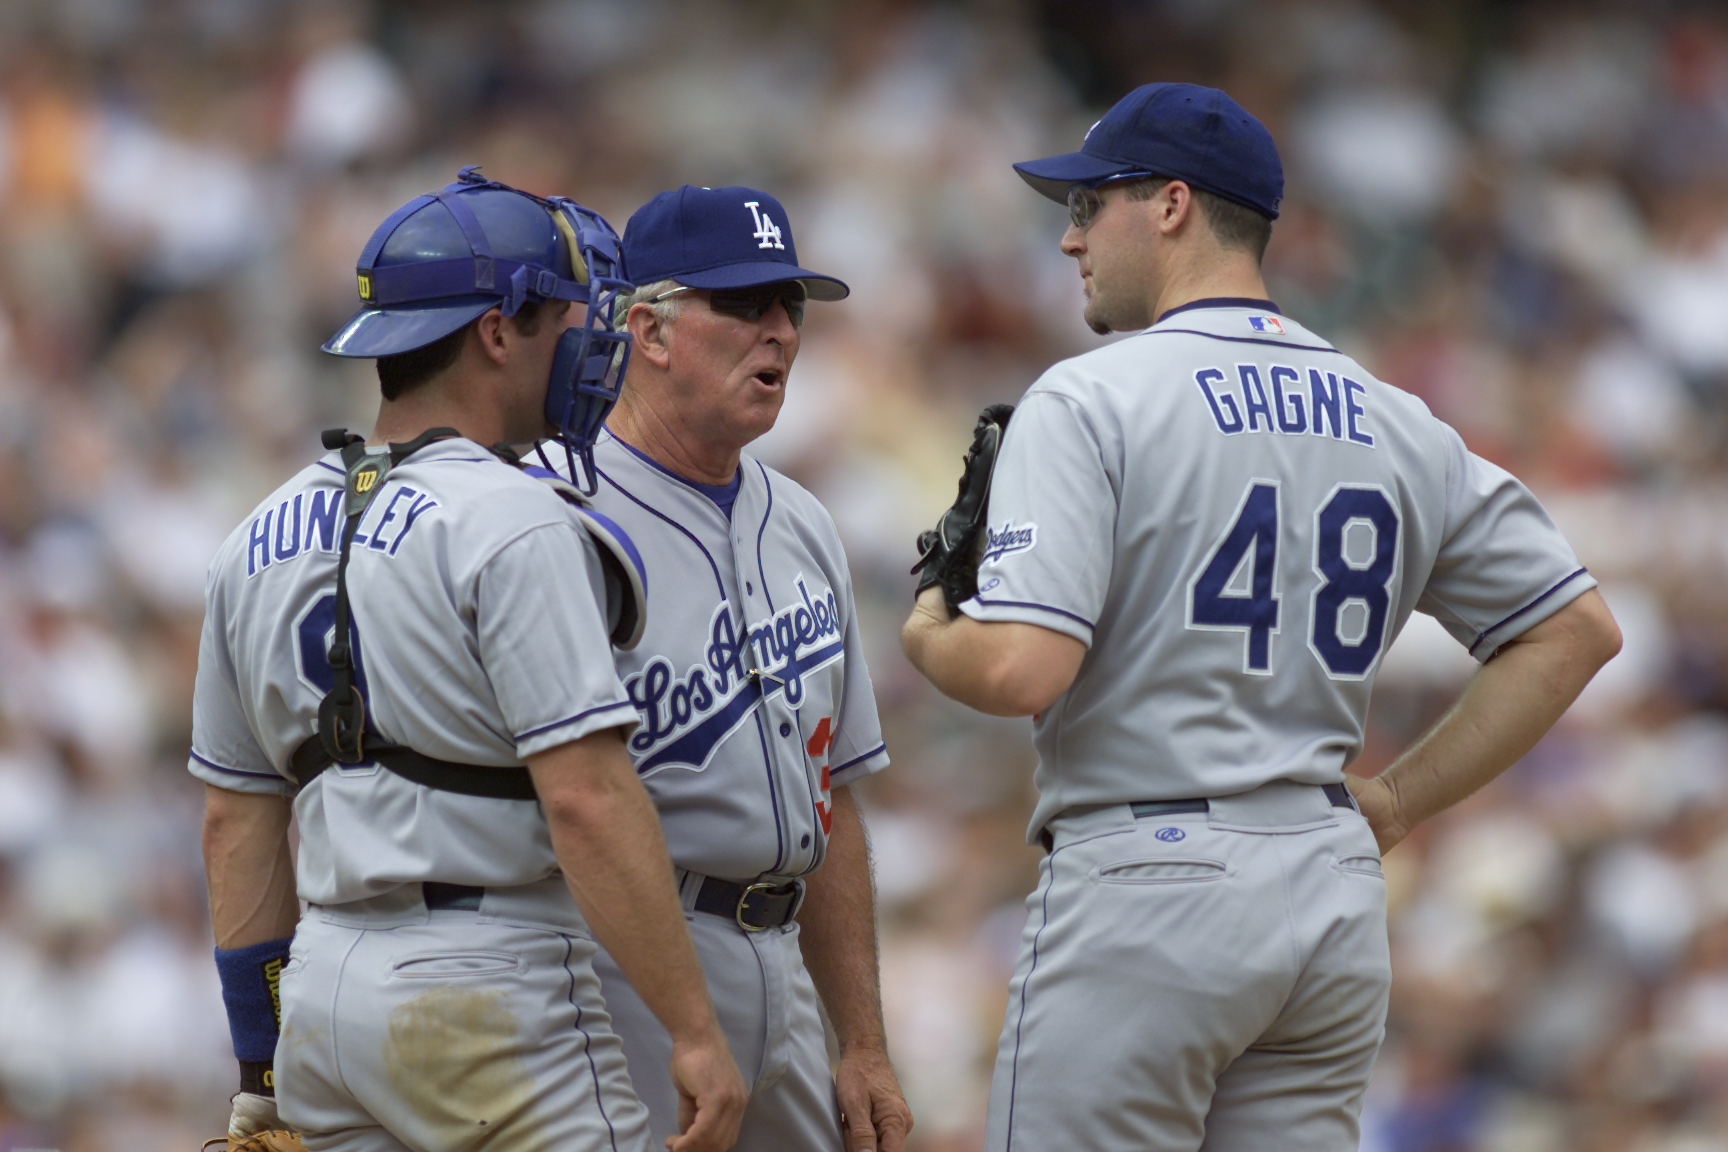 27 Jul 2000:  Pitching Coach Claude Osteen #38, Pitcher Eric Gagne #48, and Catcher Todd Hundley #9 of the Los Angeles Dodgers have a discussion on the mound during the game against the Colorado Rockies at Coors Field in Denver, Colorado.  The Dodgers def